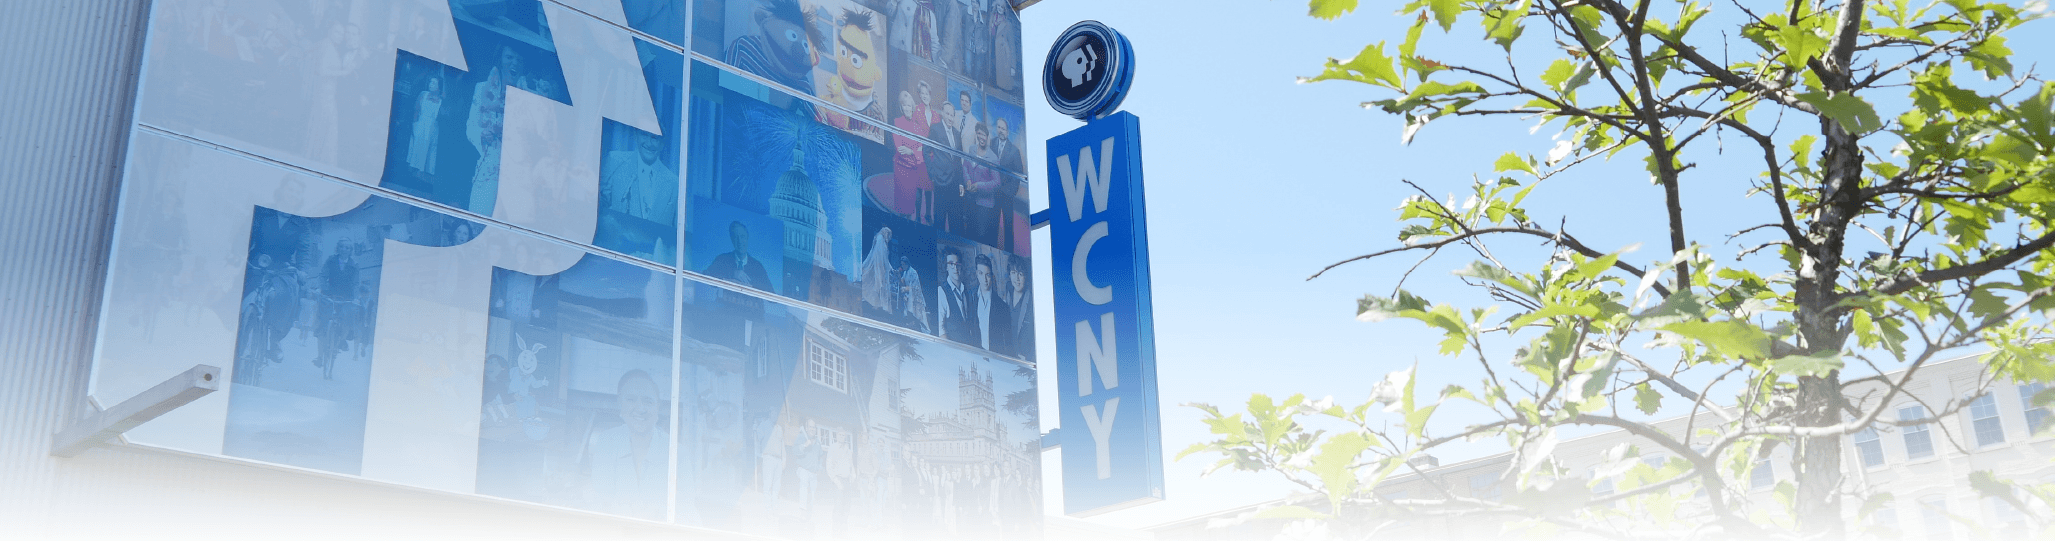 About WCNY